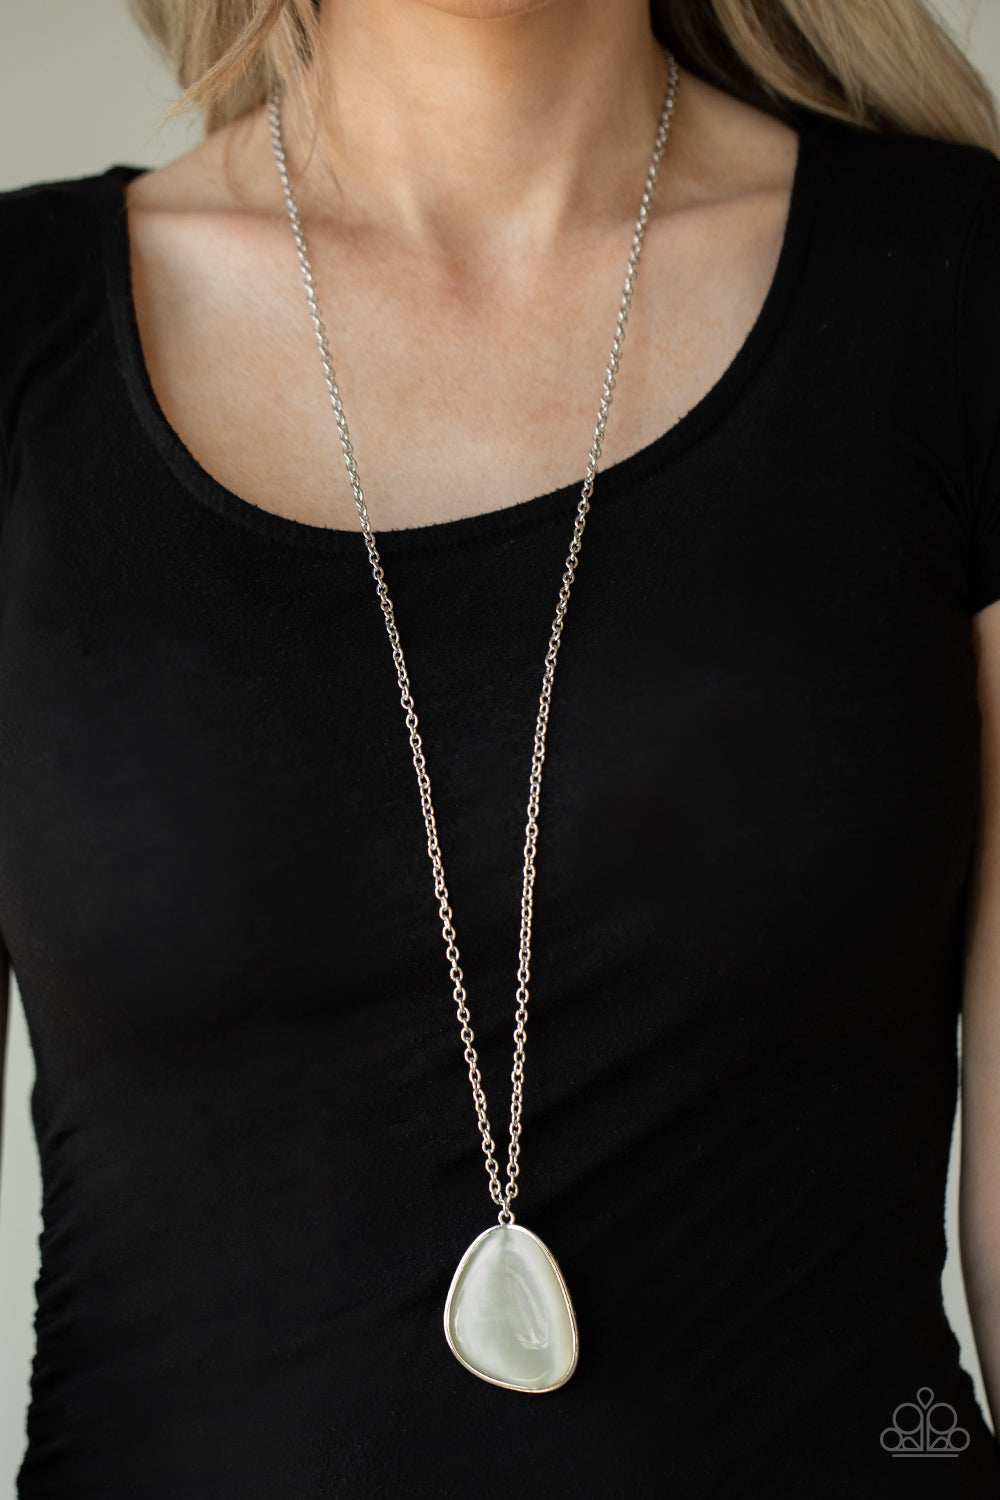 Ethereal Experience - White Paparazzi Necklace